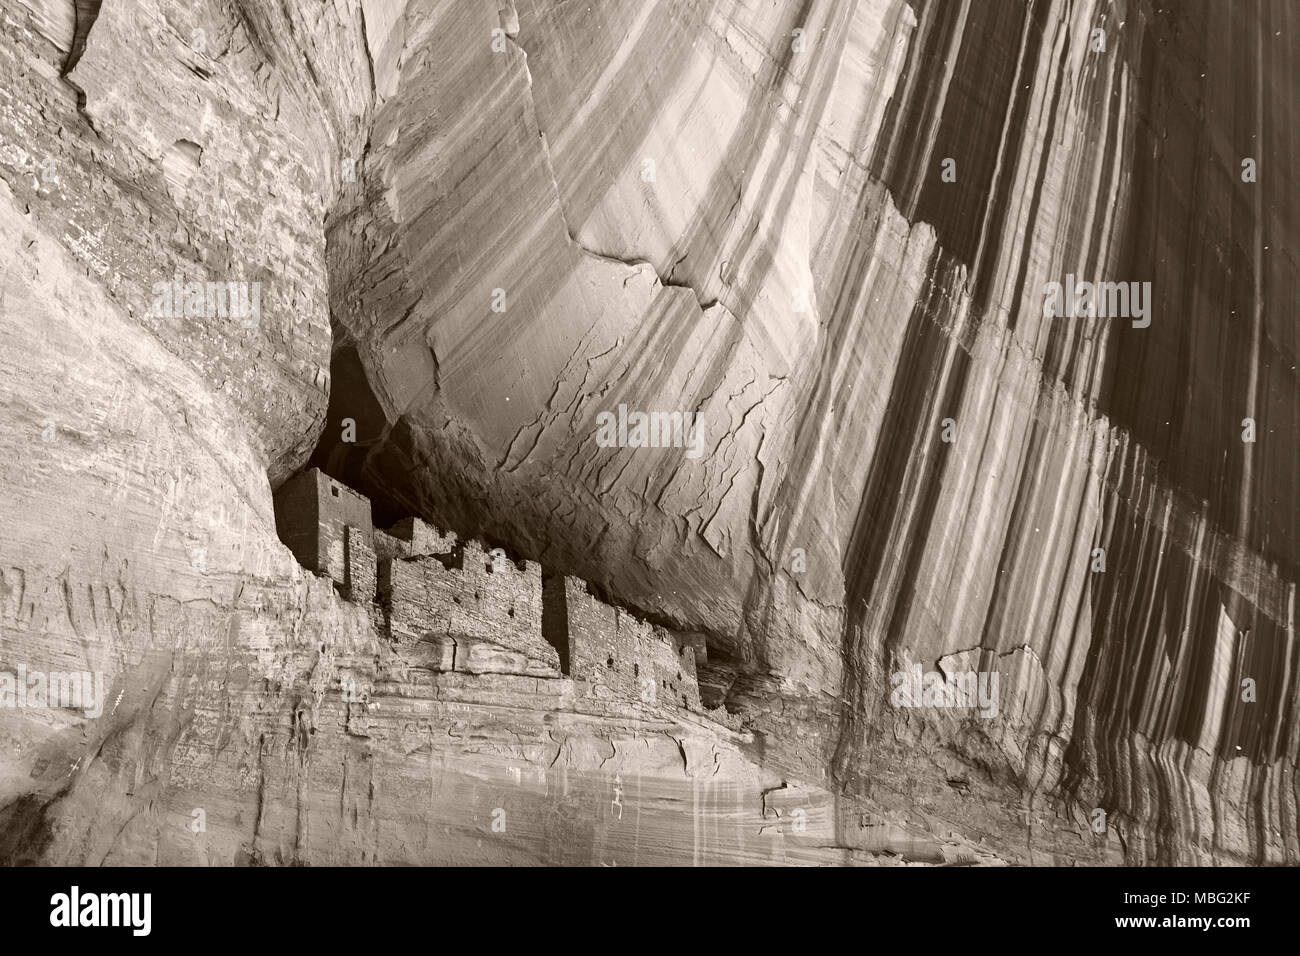 Beautiful black and white monochrome picture of Anazasi cave dwellings built in a cliff in Canyon de Chelly, Chinle, Arizona. Stock Photo